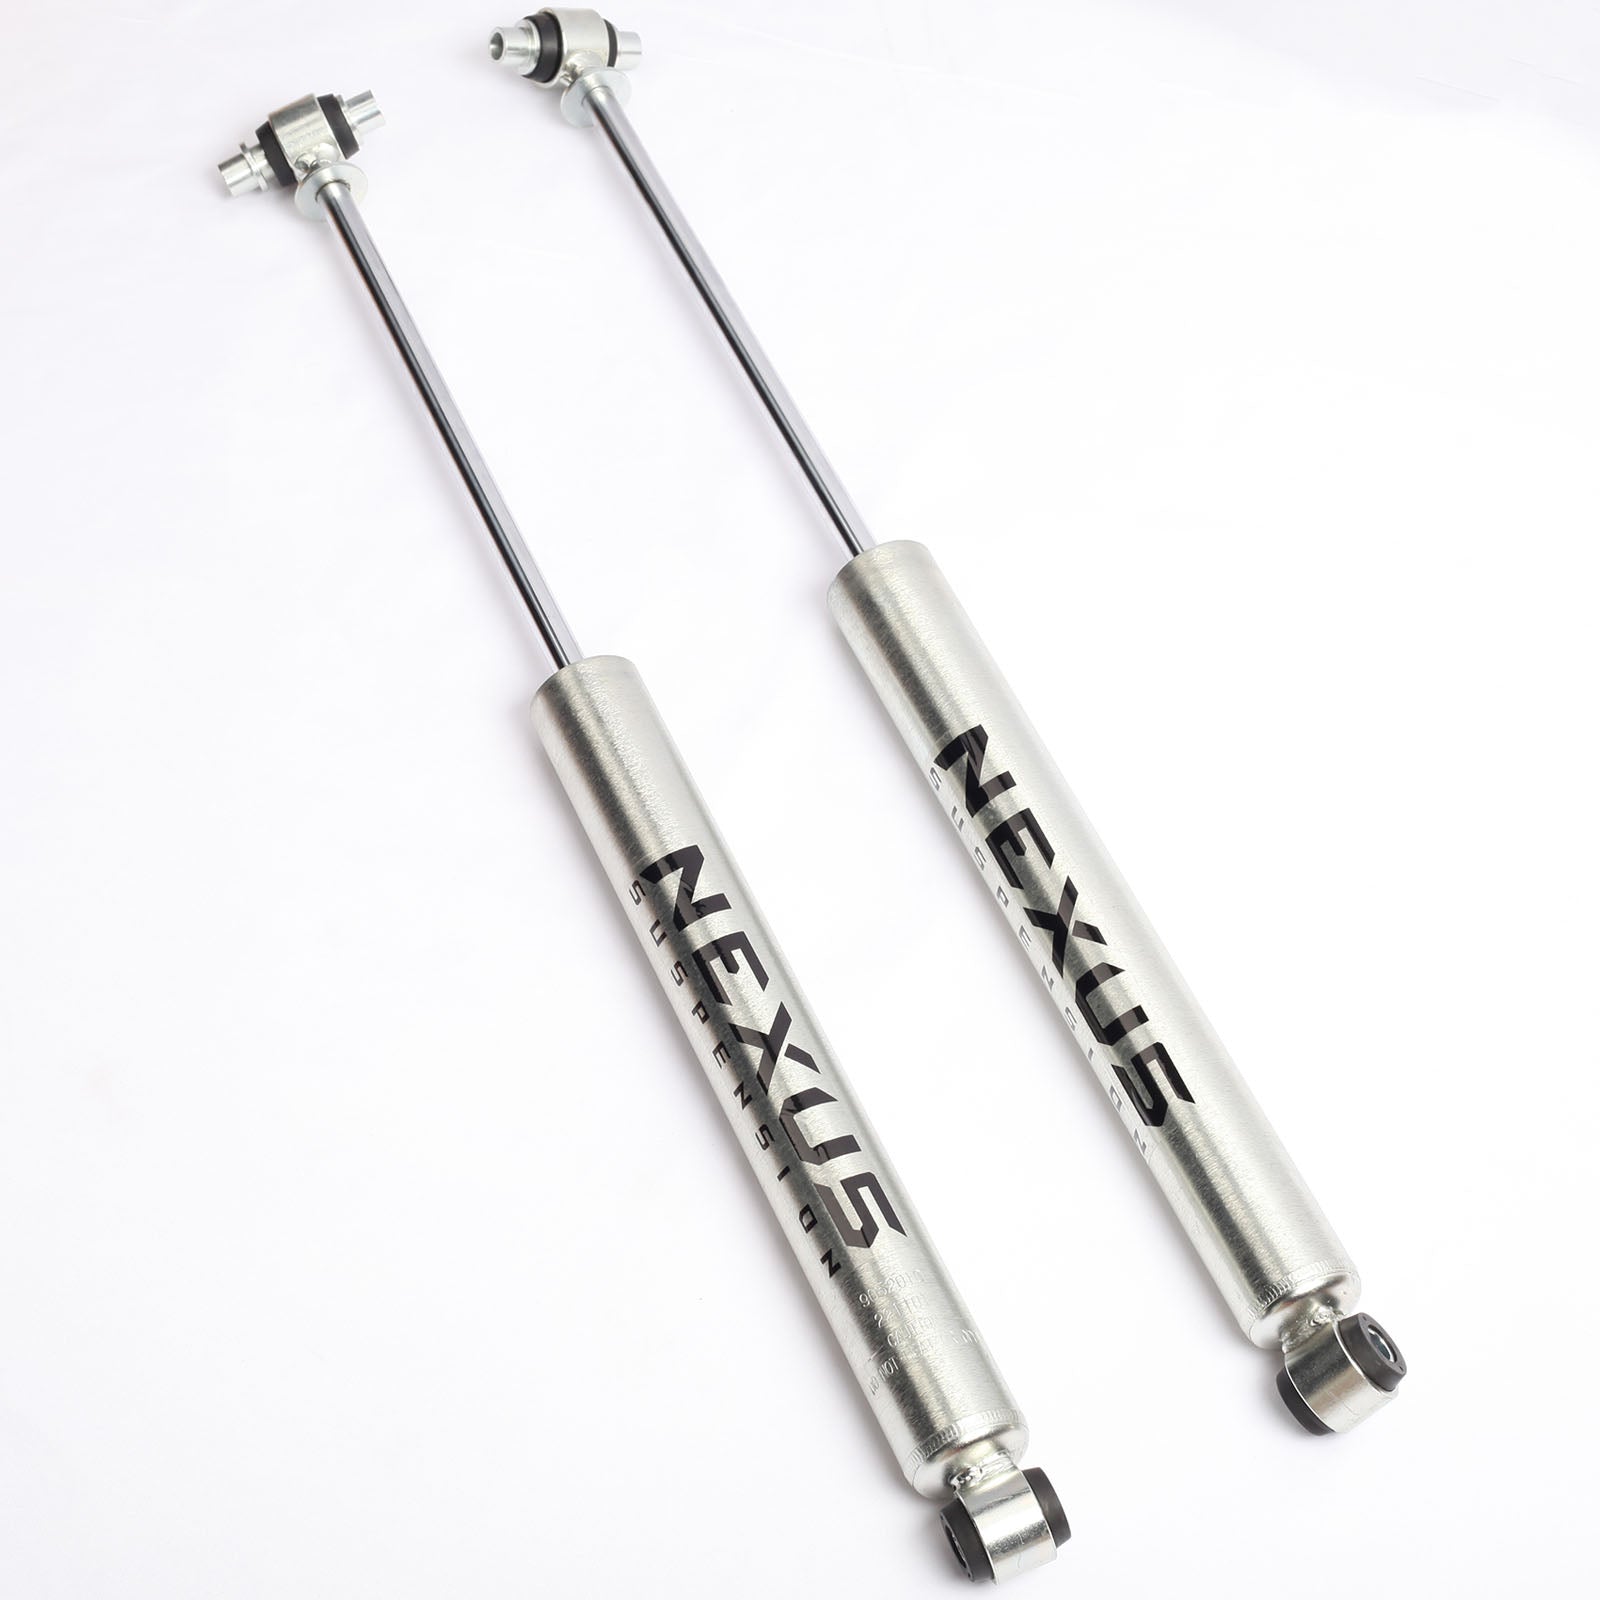 NEXUS SUSPENSION 2-3 Inch Lift Rear Shock Absorber for 2003-2008 Dodge RAM 2500 2wd Dodge RAM 3500 2wd,Zinc Plated Coating,Pair Pack